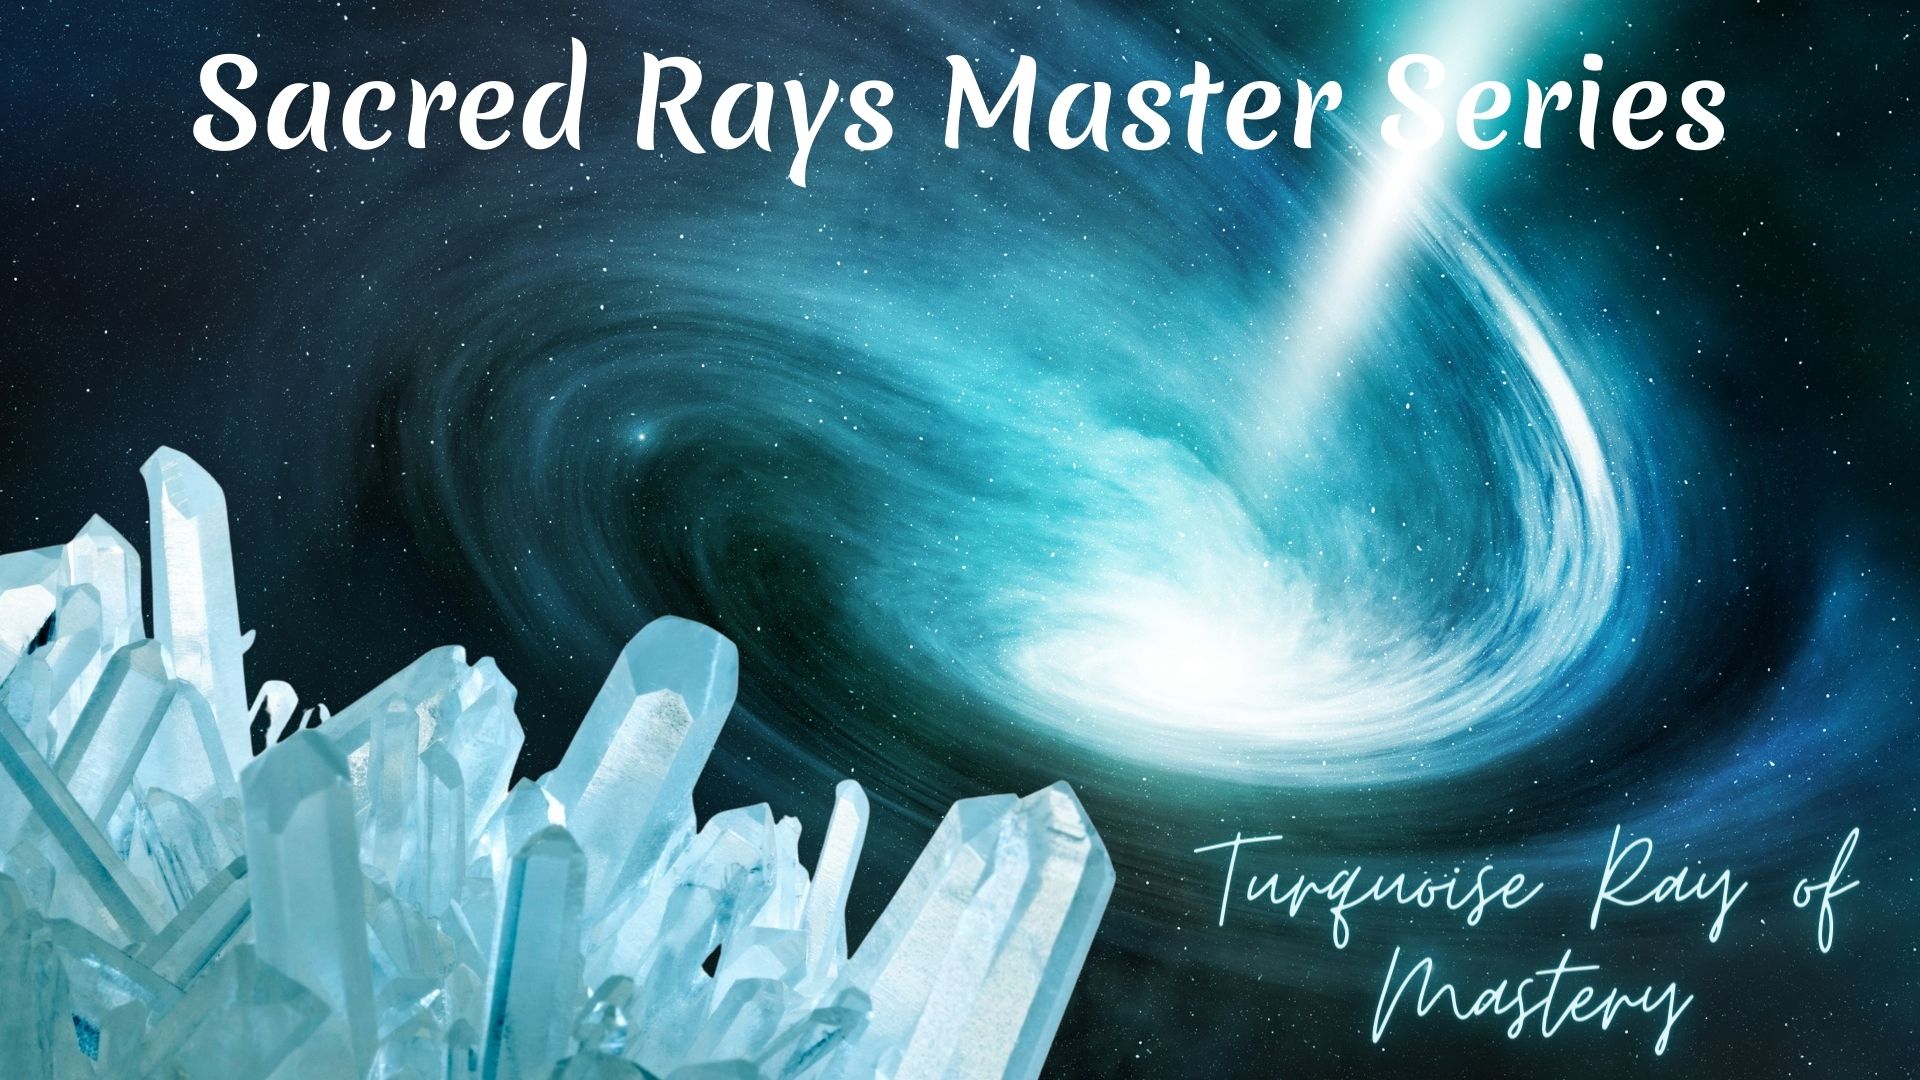 Ascension Sacred Rays by Shakti